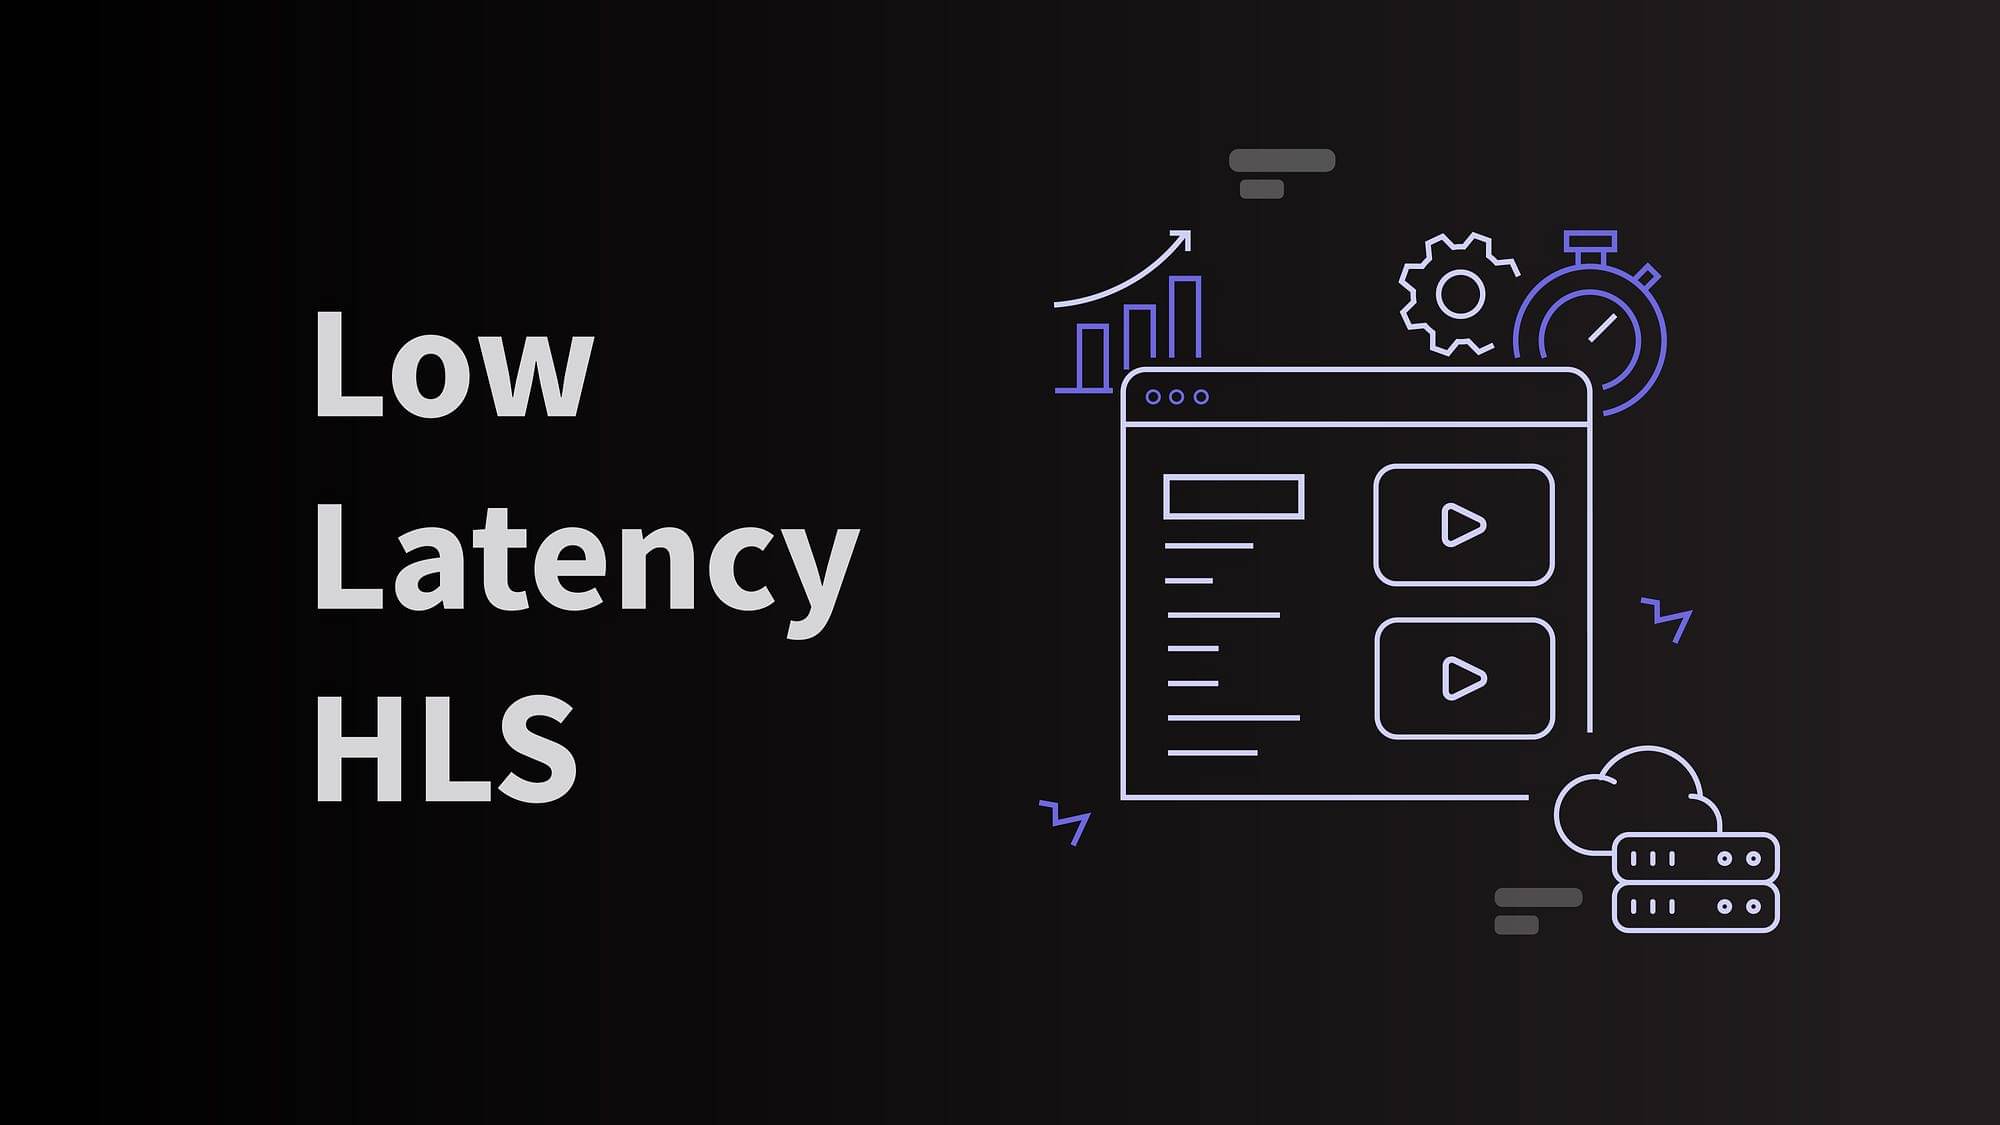 Overview on Low Latency HTTP Live Streaming (HLS)